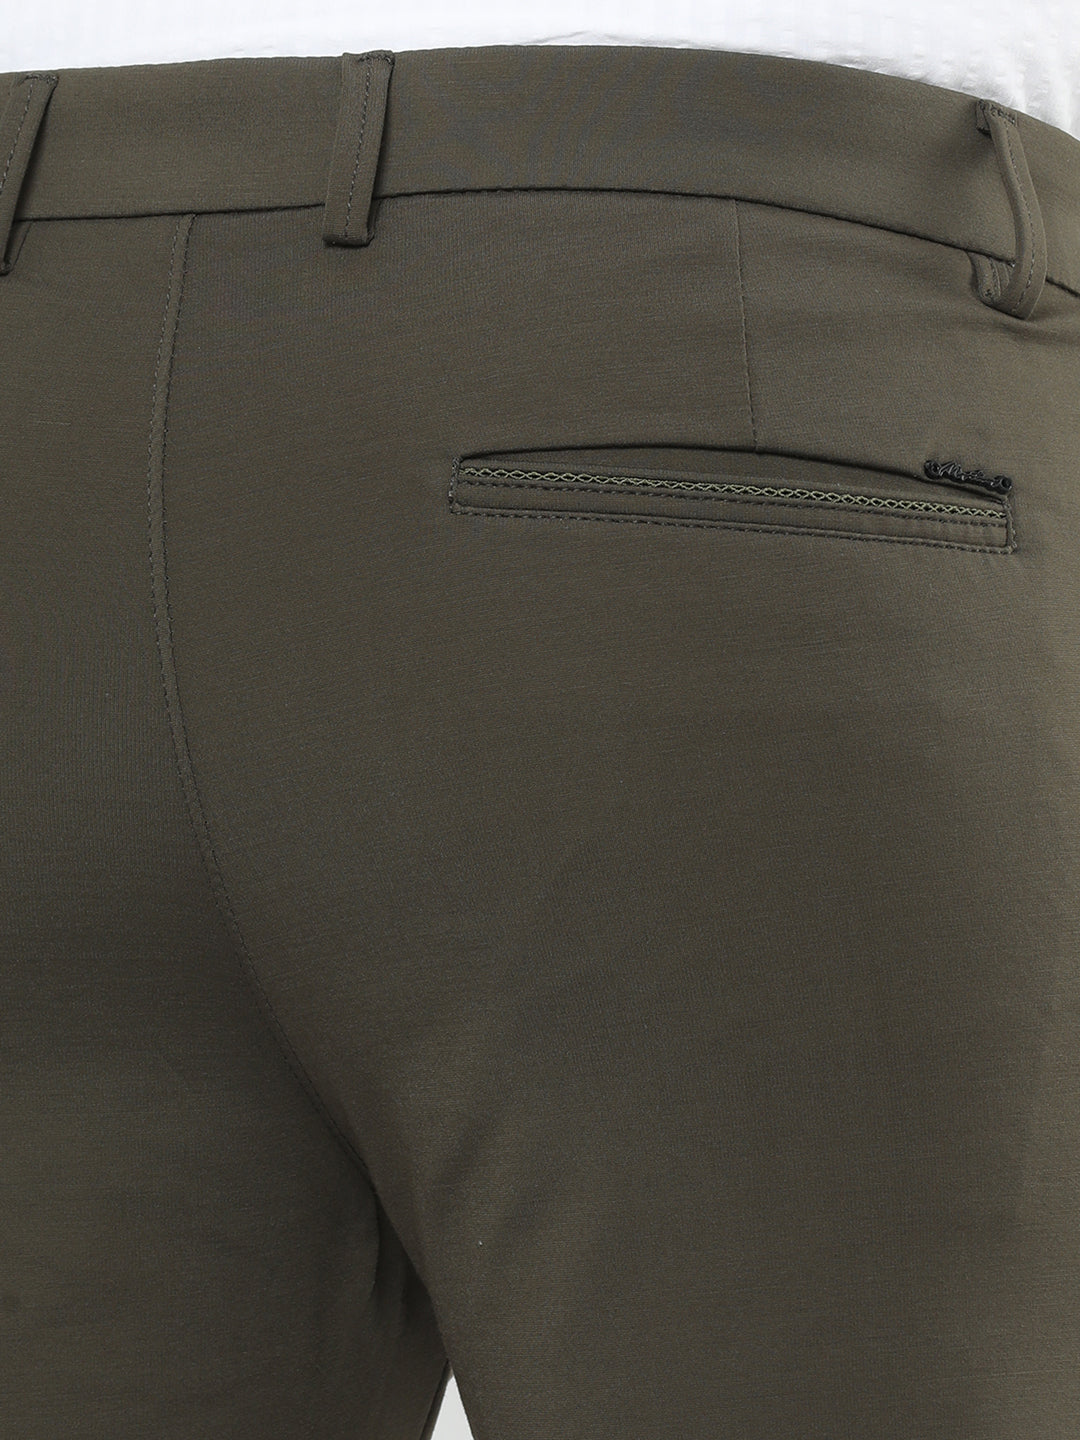 Trendy Solid Olive Green Chinos 